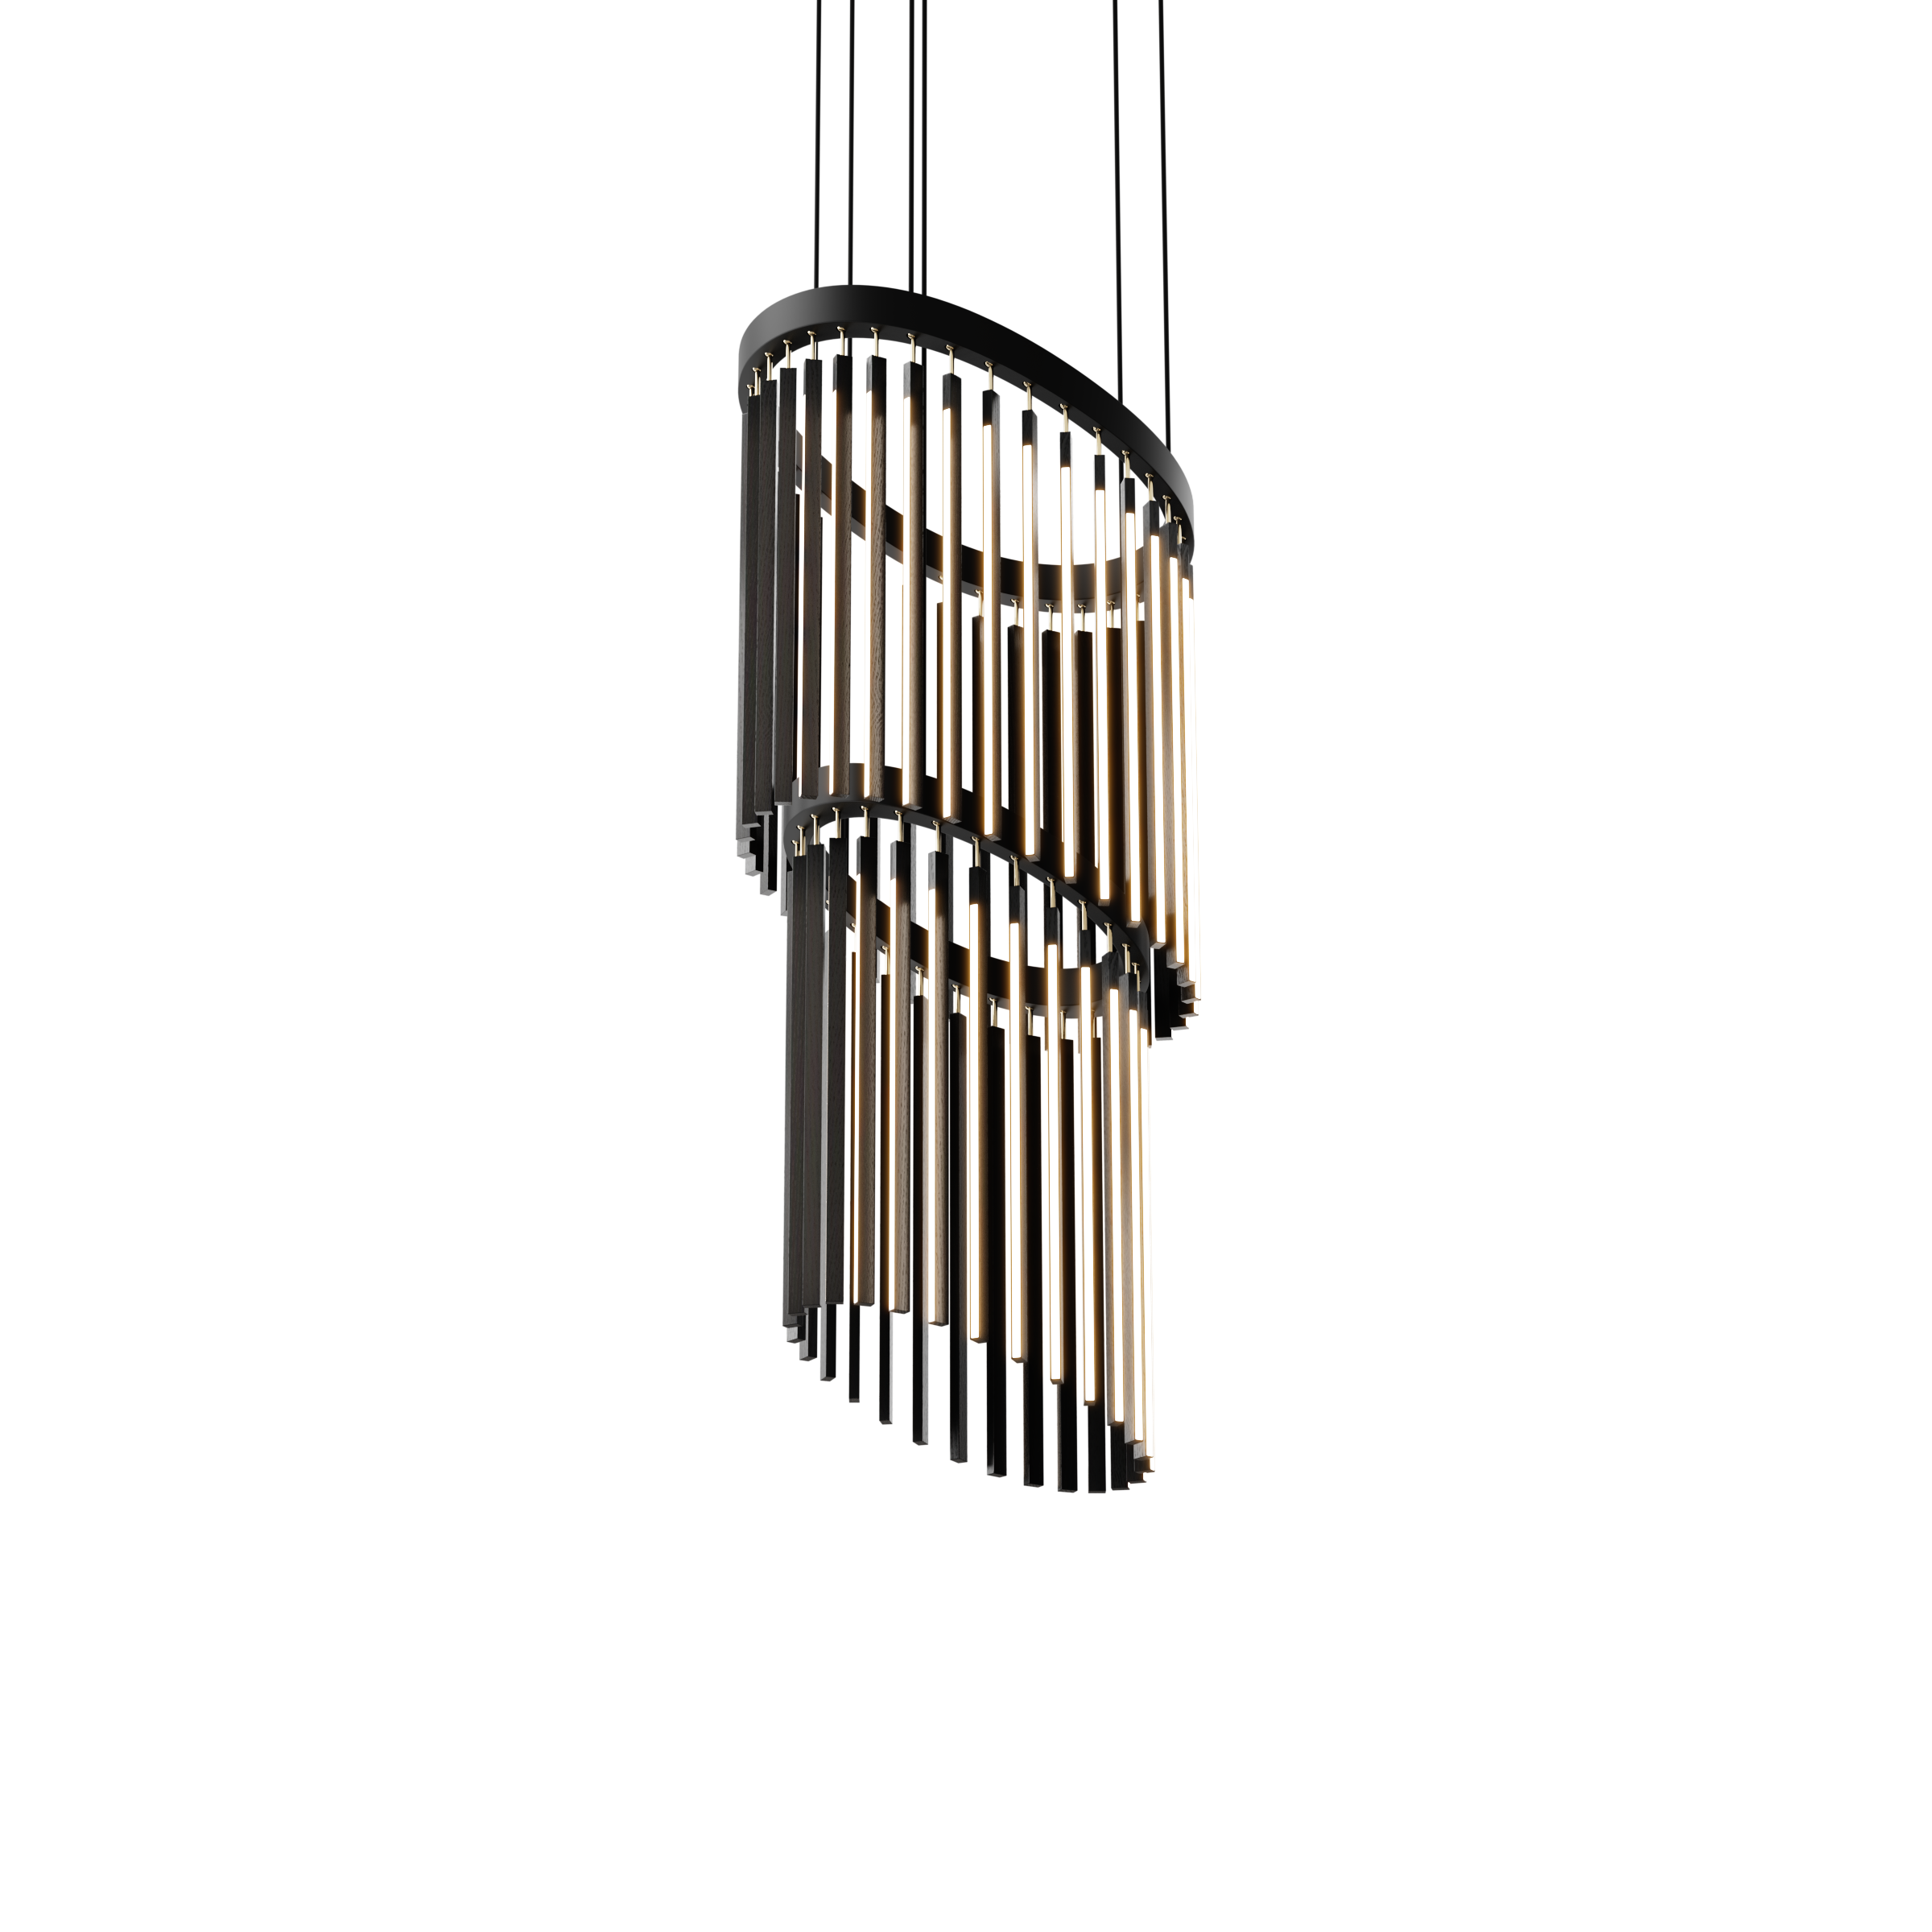 Image of a Stickbulb Chime Cascade lighting fixture. The modern fixture consists of sleek wooden beams with multiple integrated LED bulbs.